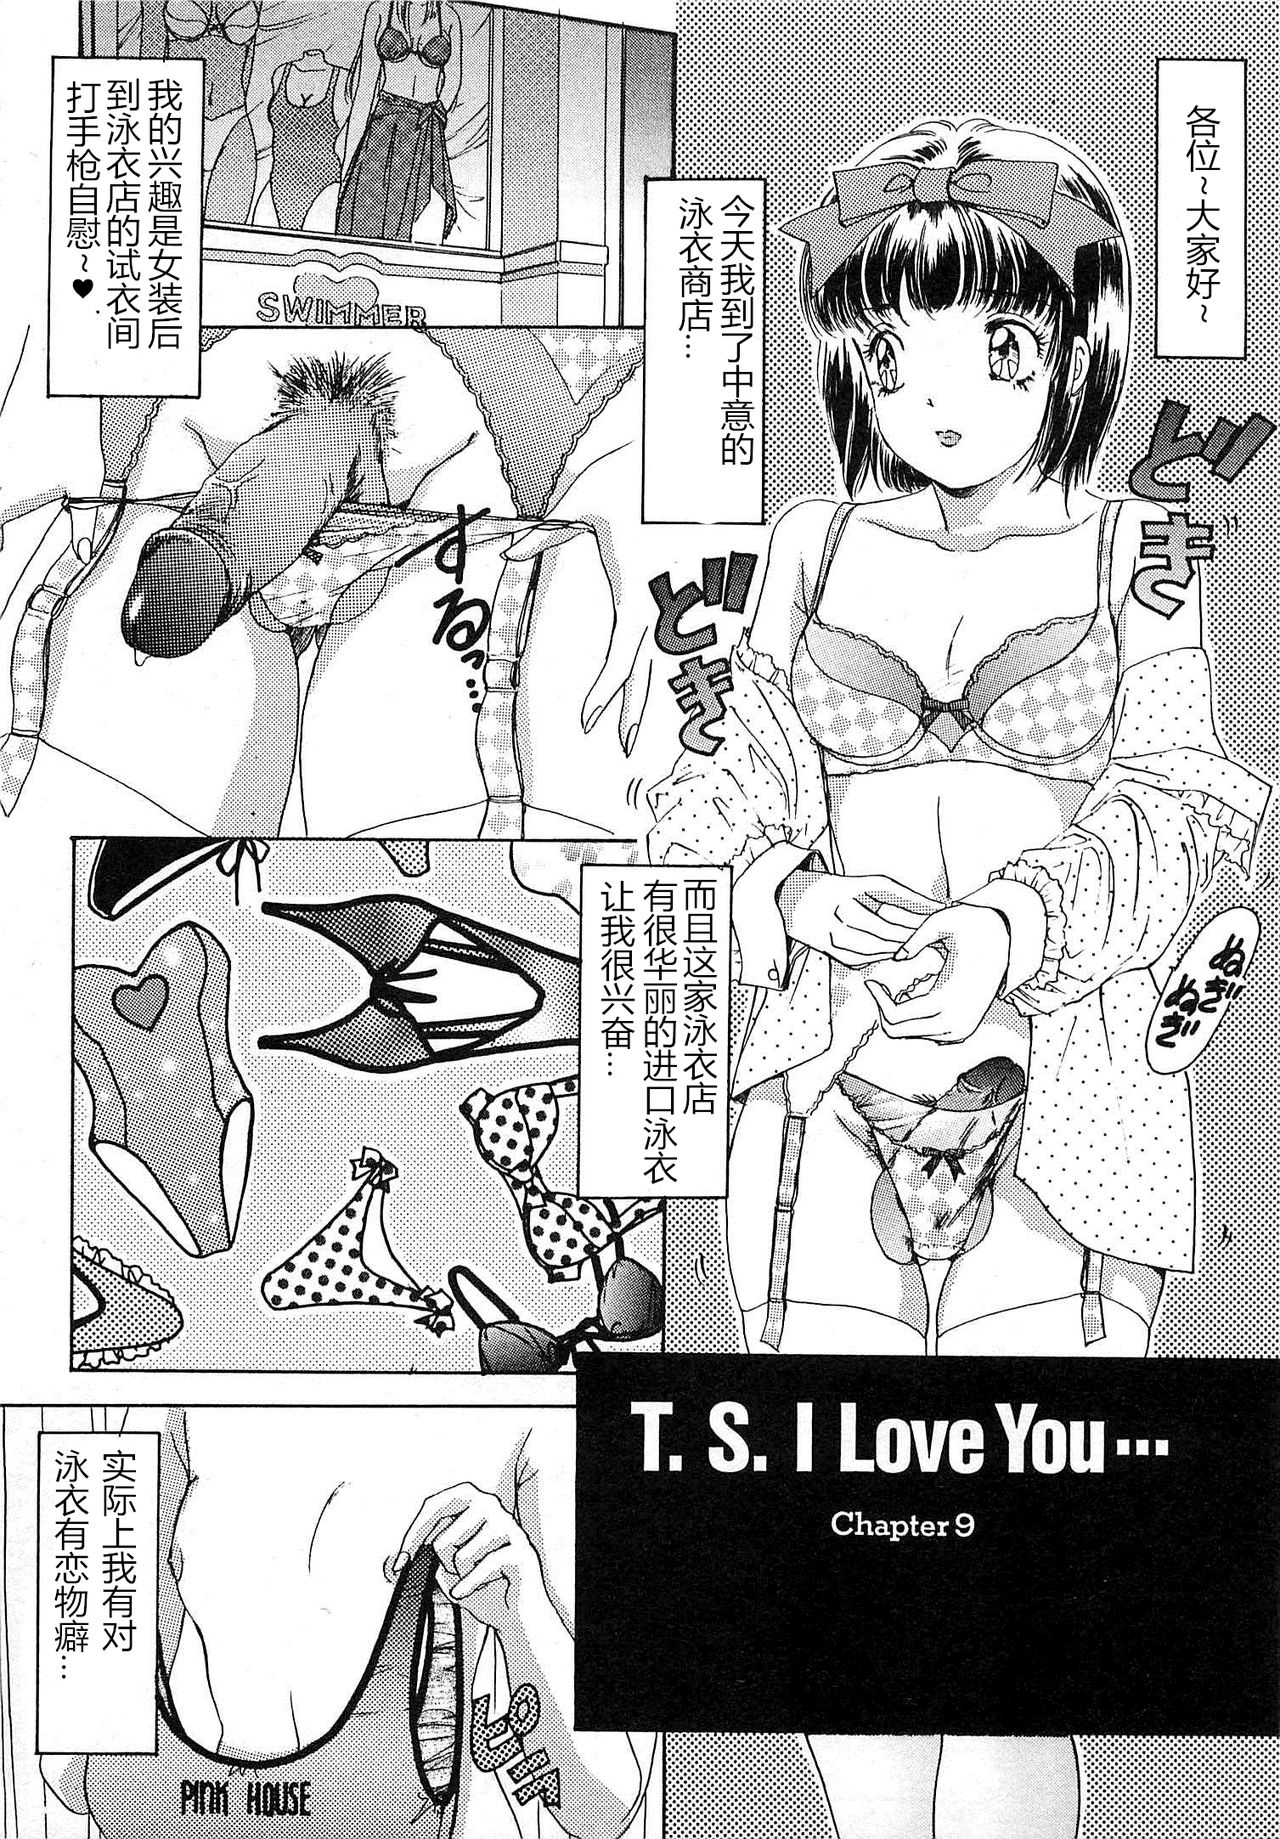 [The Amanoja9] T.S. I LOVE YOU chapter 09 [Chinese] [M男个人汉化] [The Amanoja9] T.S. I LOVE YOU chapter 09 [中国翻訳]